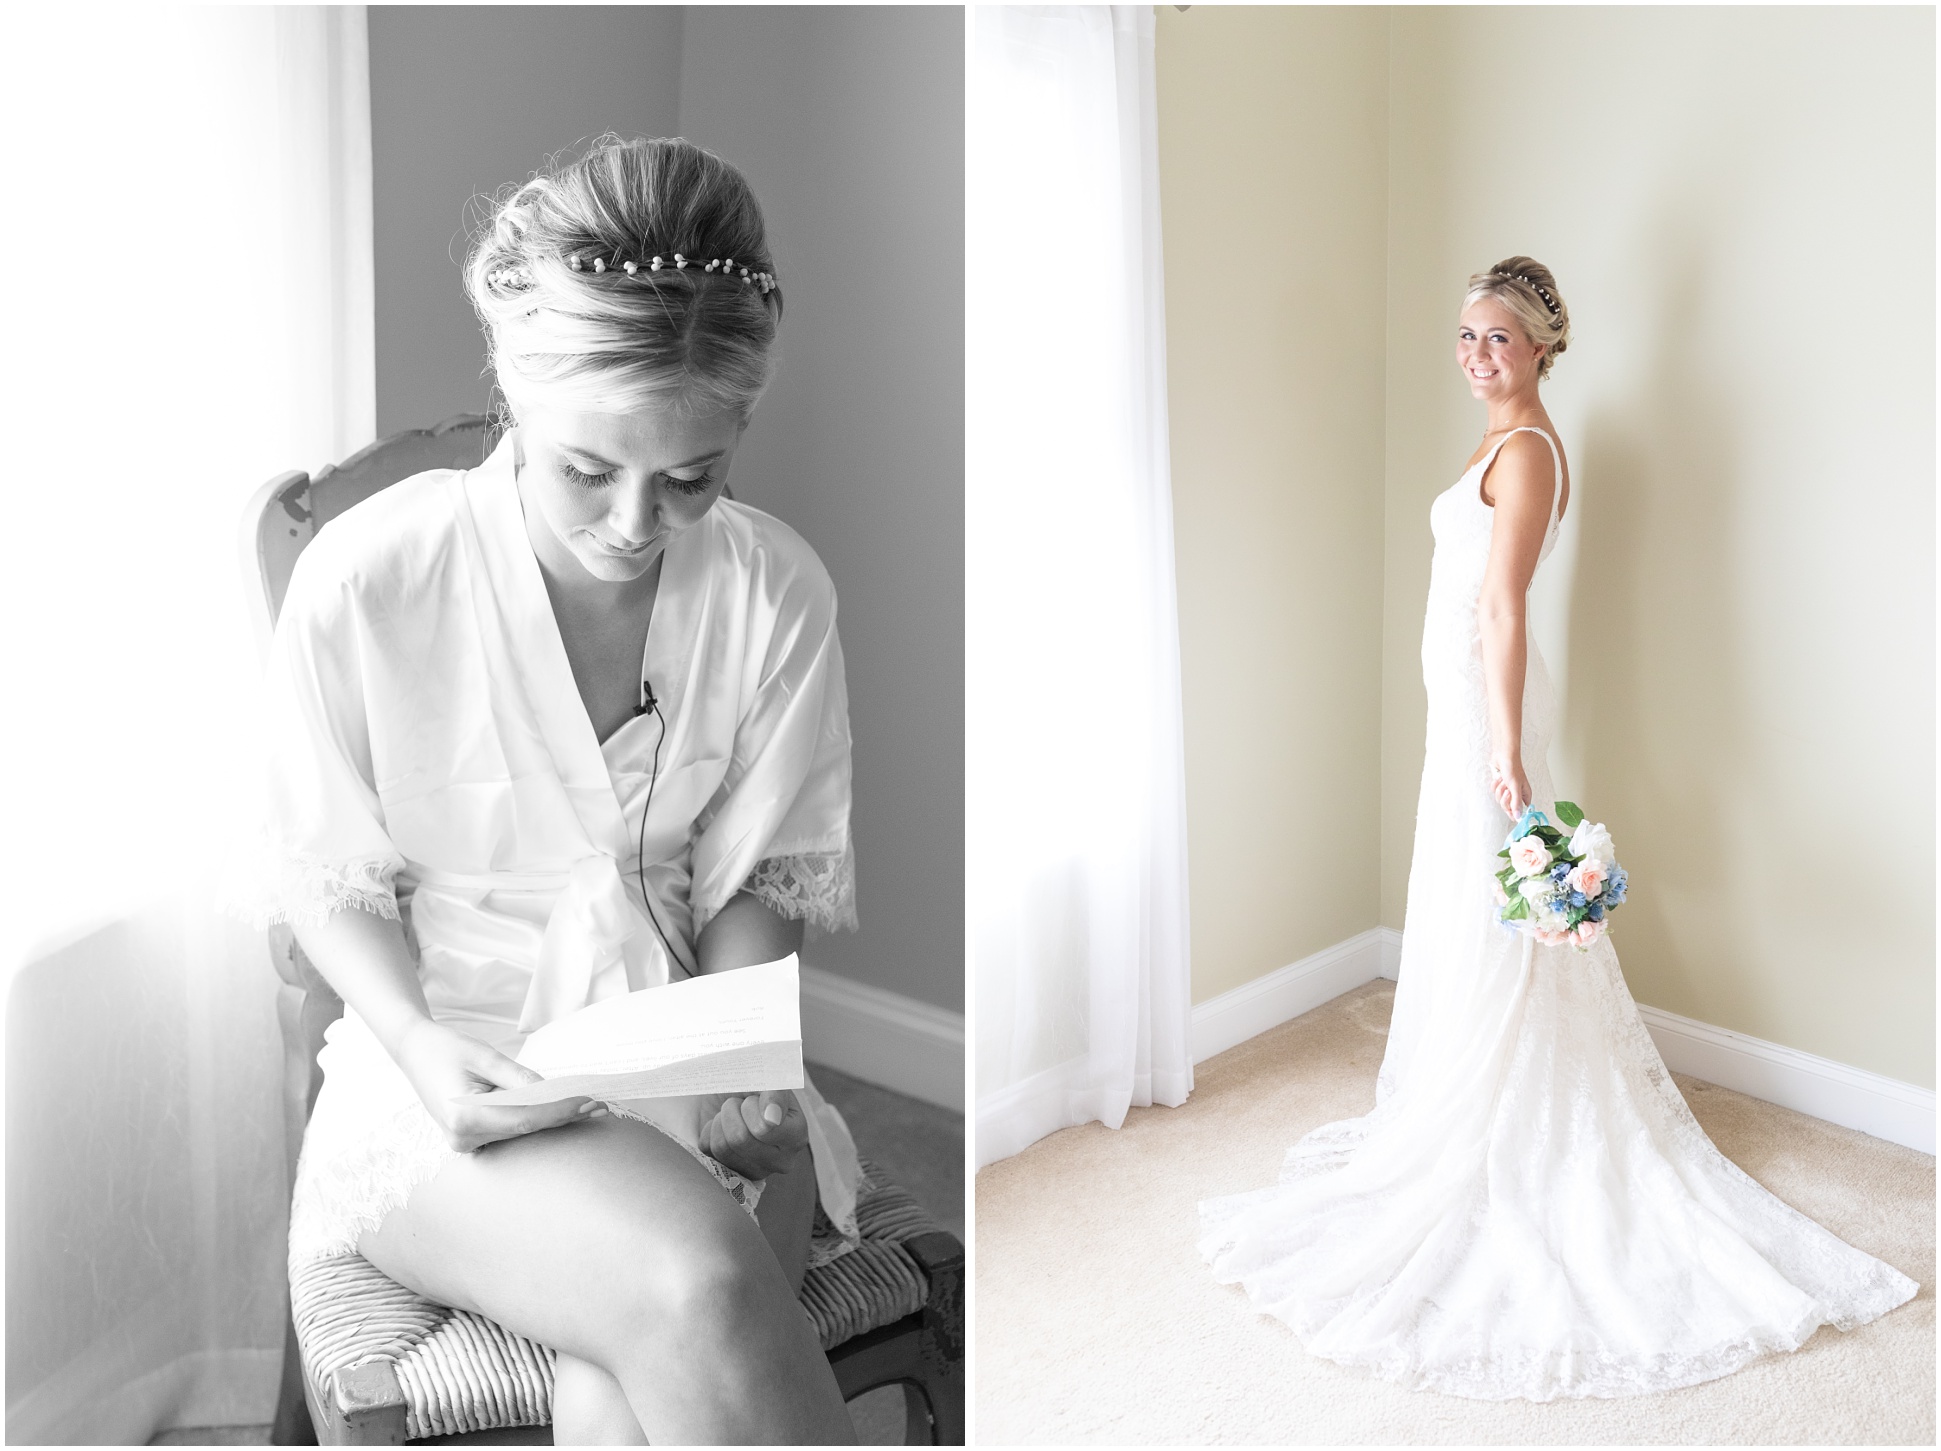 Left Image: Bride reading her note from her groom, Right Image: bridal portrait in getting ready room